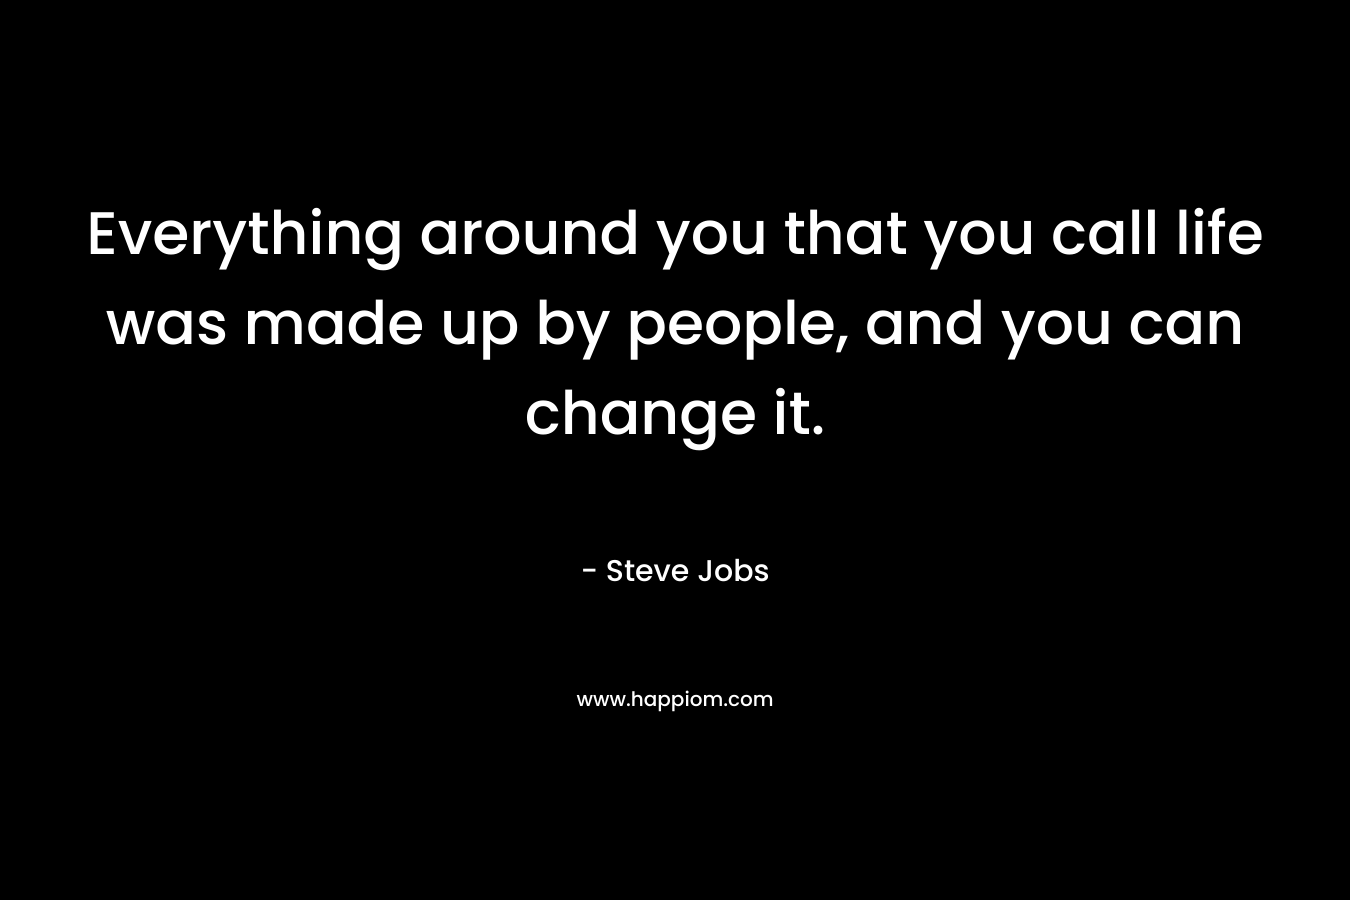 Everything around you that you call life was made up by people, and you can change it. – Steve Jobs